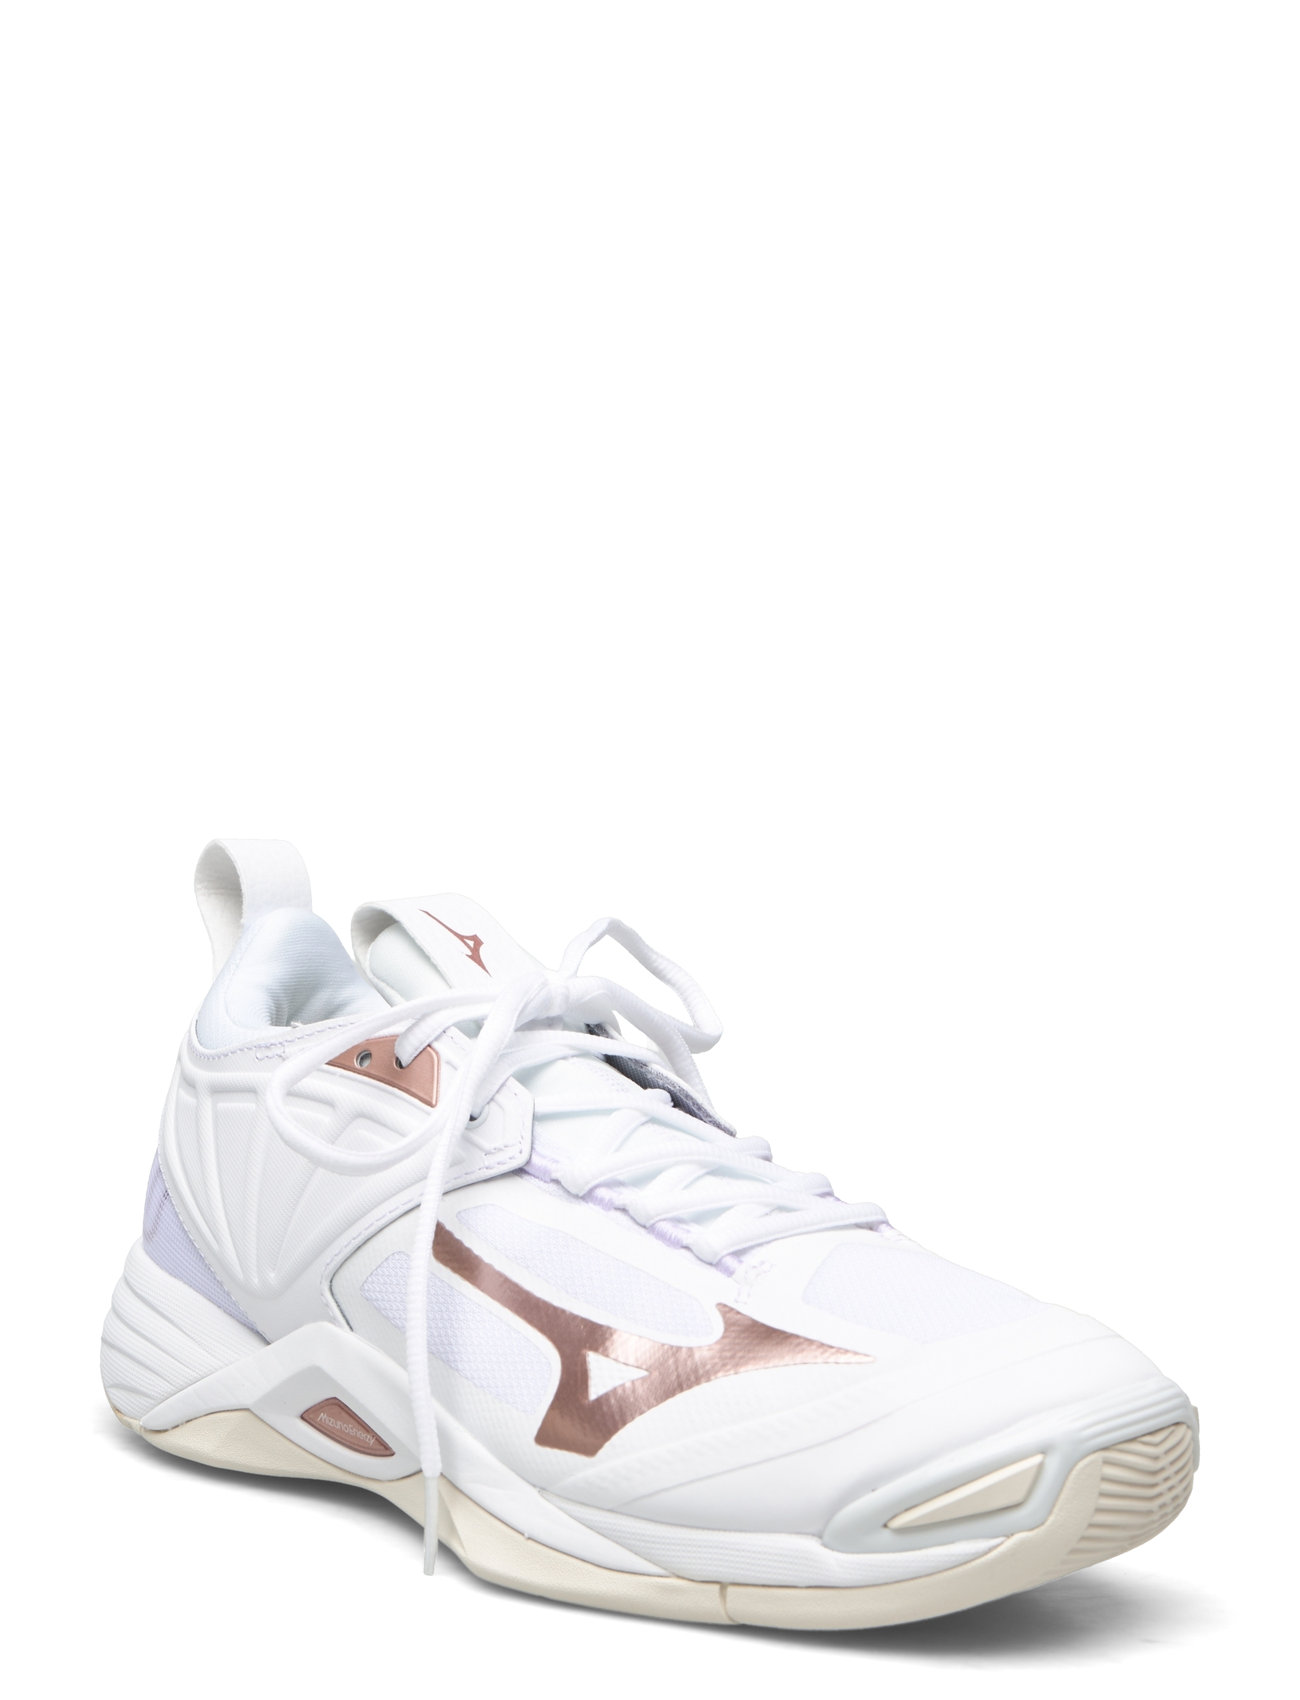 Wave Momentum 2 W Sport Sport Shoes Indoor Sports Shoes White Mizuno